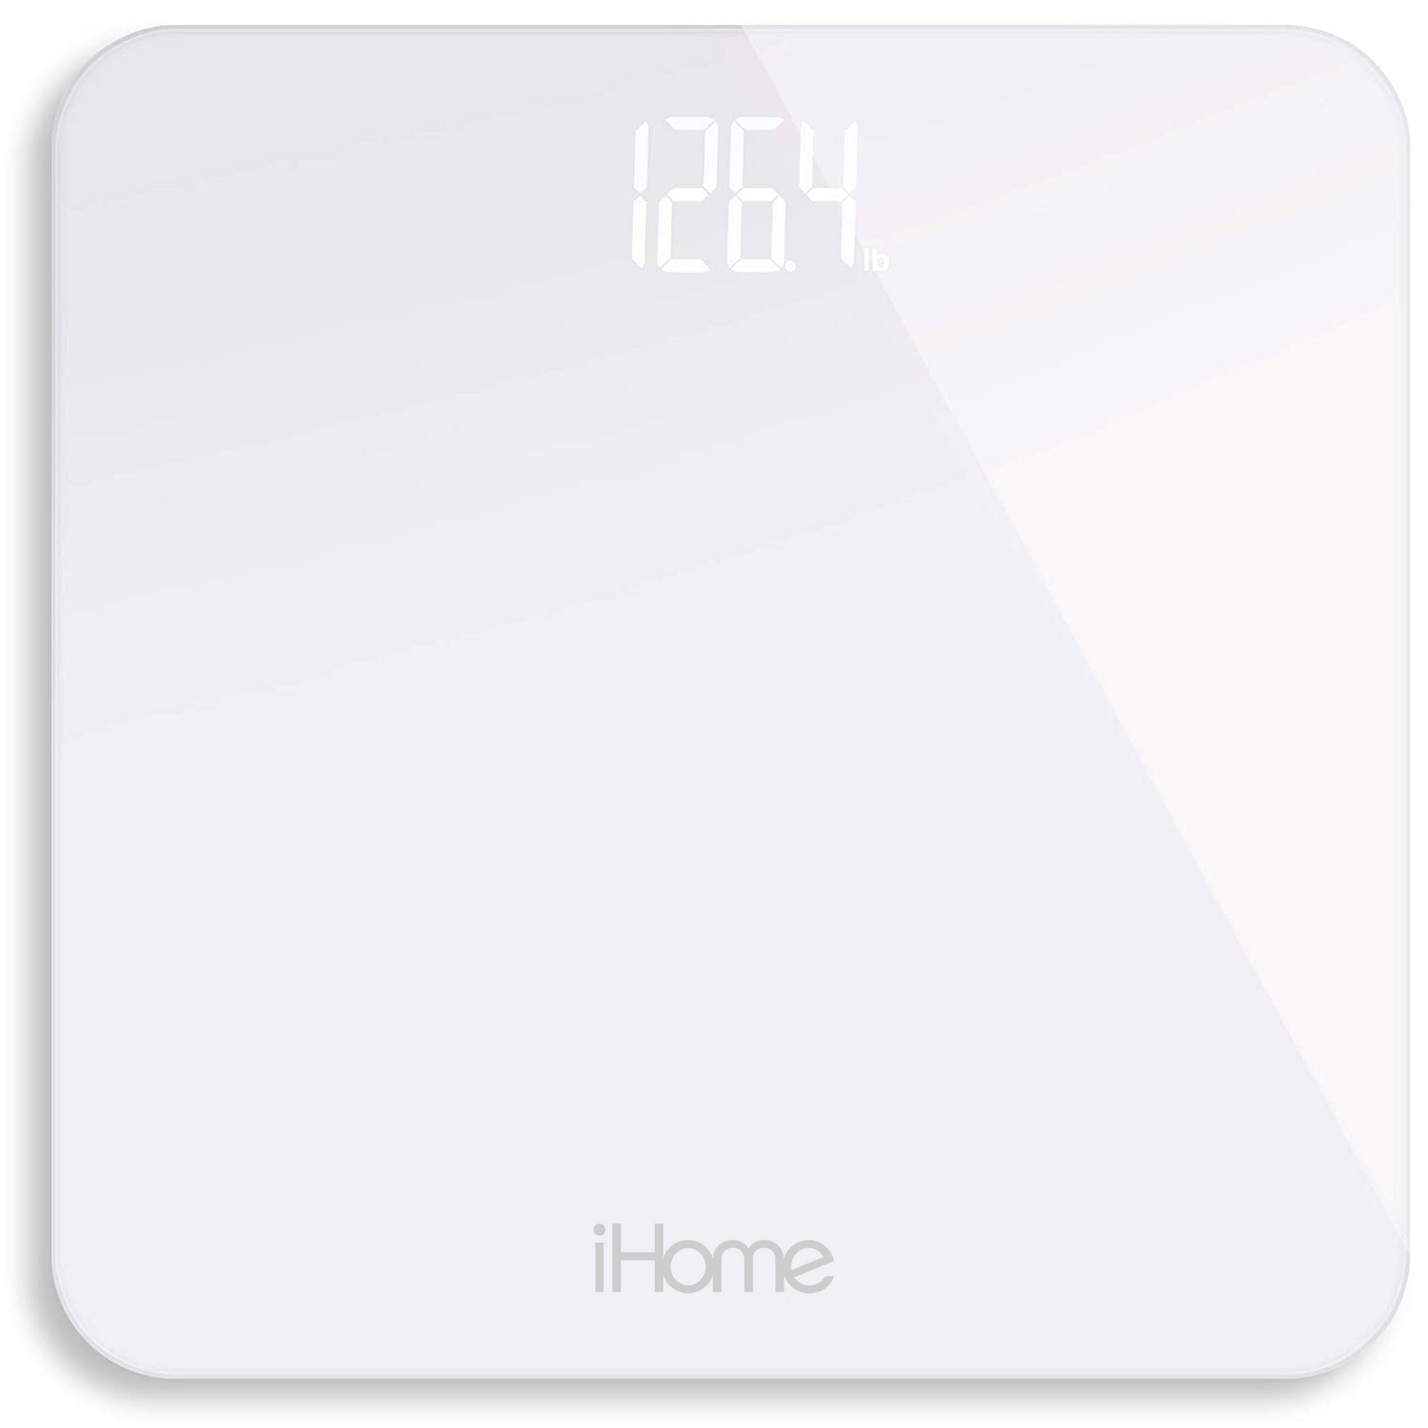 iHome Digital Scale Step-On Bathroom Scale - iHome High Precision Body Weight Scale - 400 lbs, Battery Powered with LED Display - Batteries Included